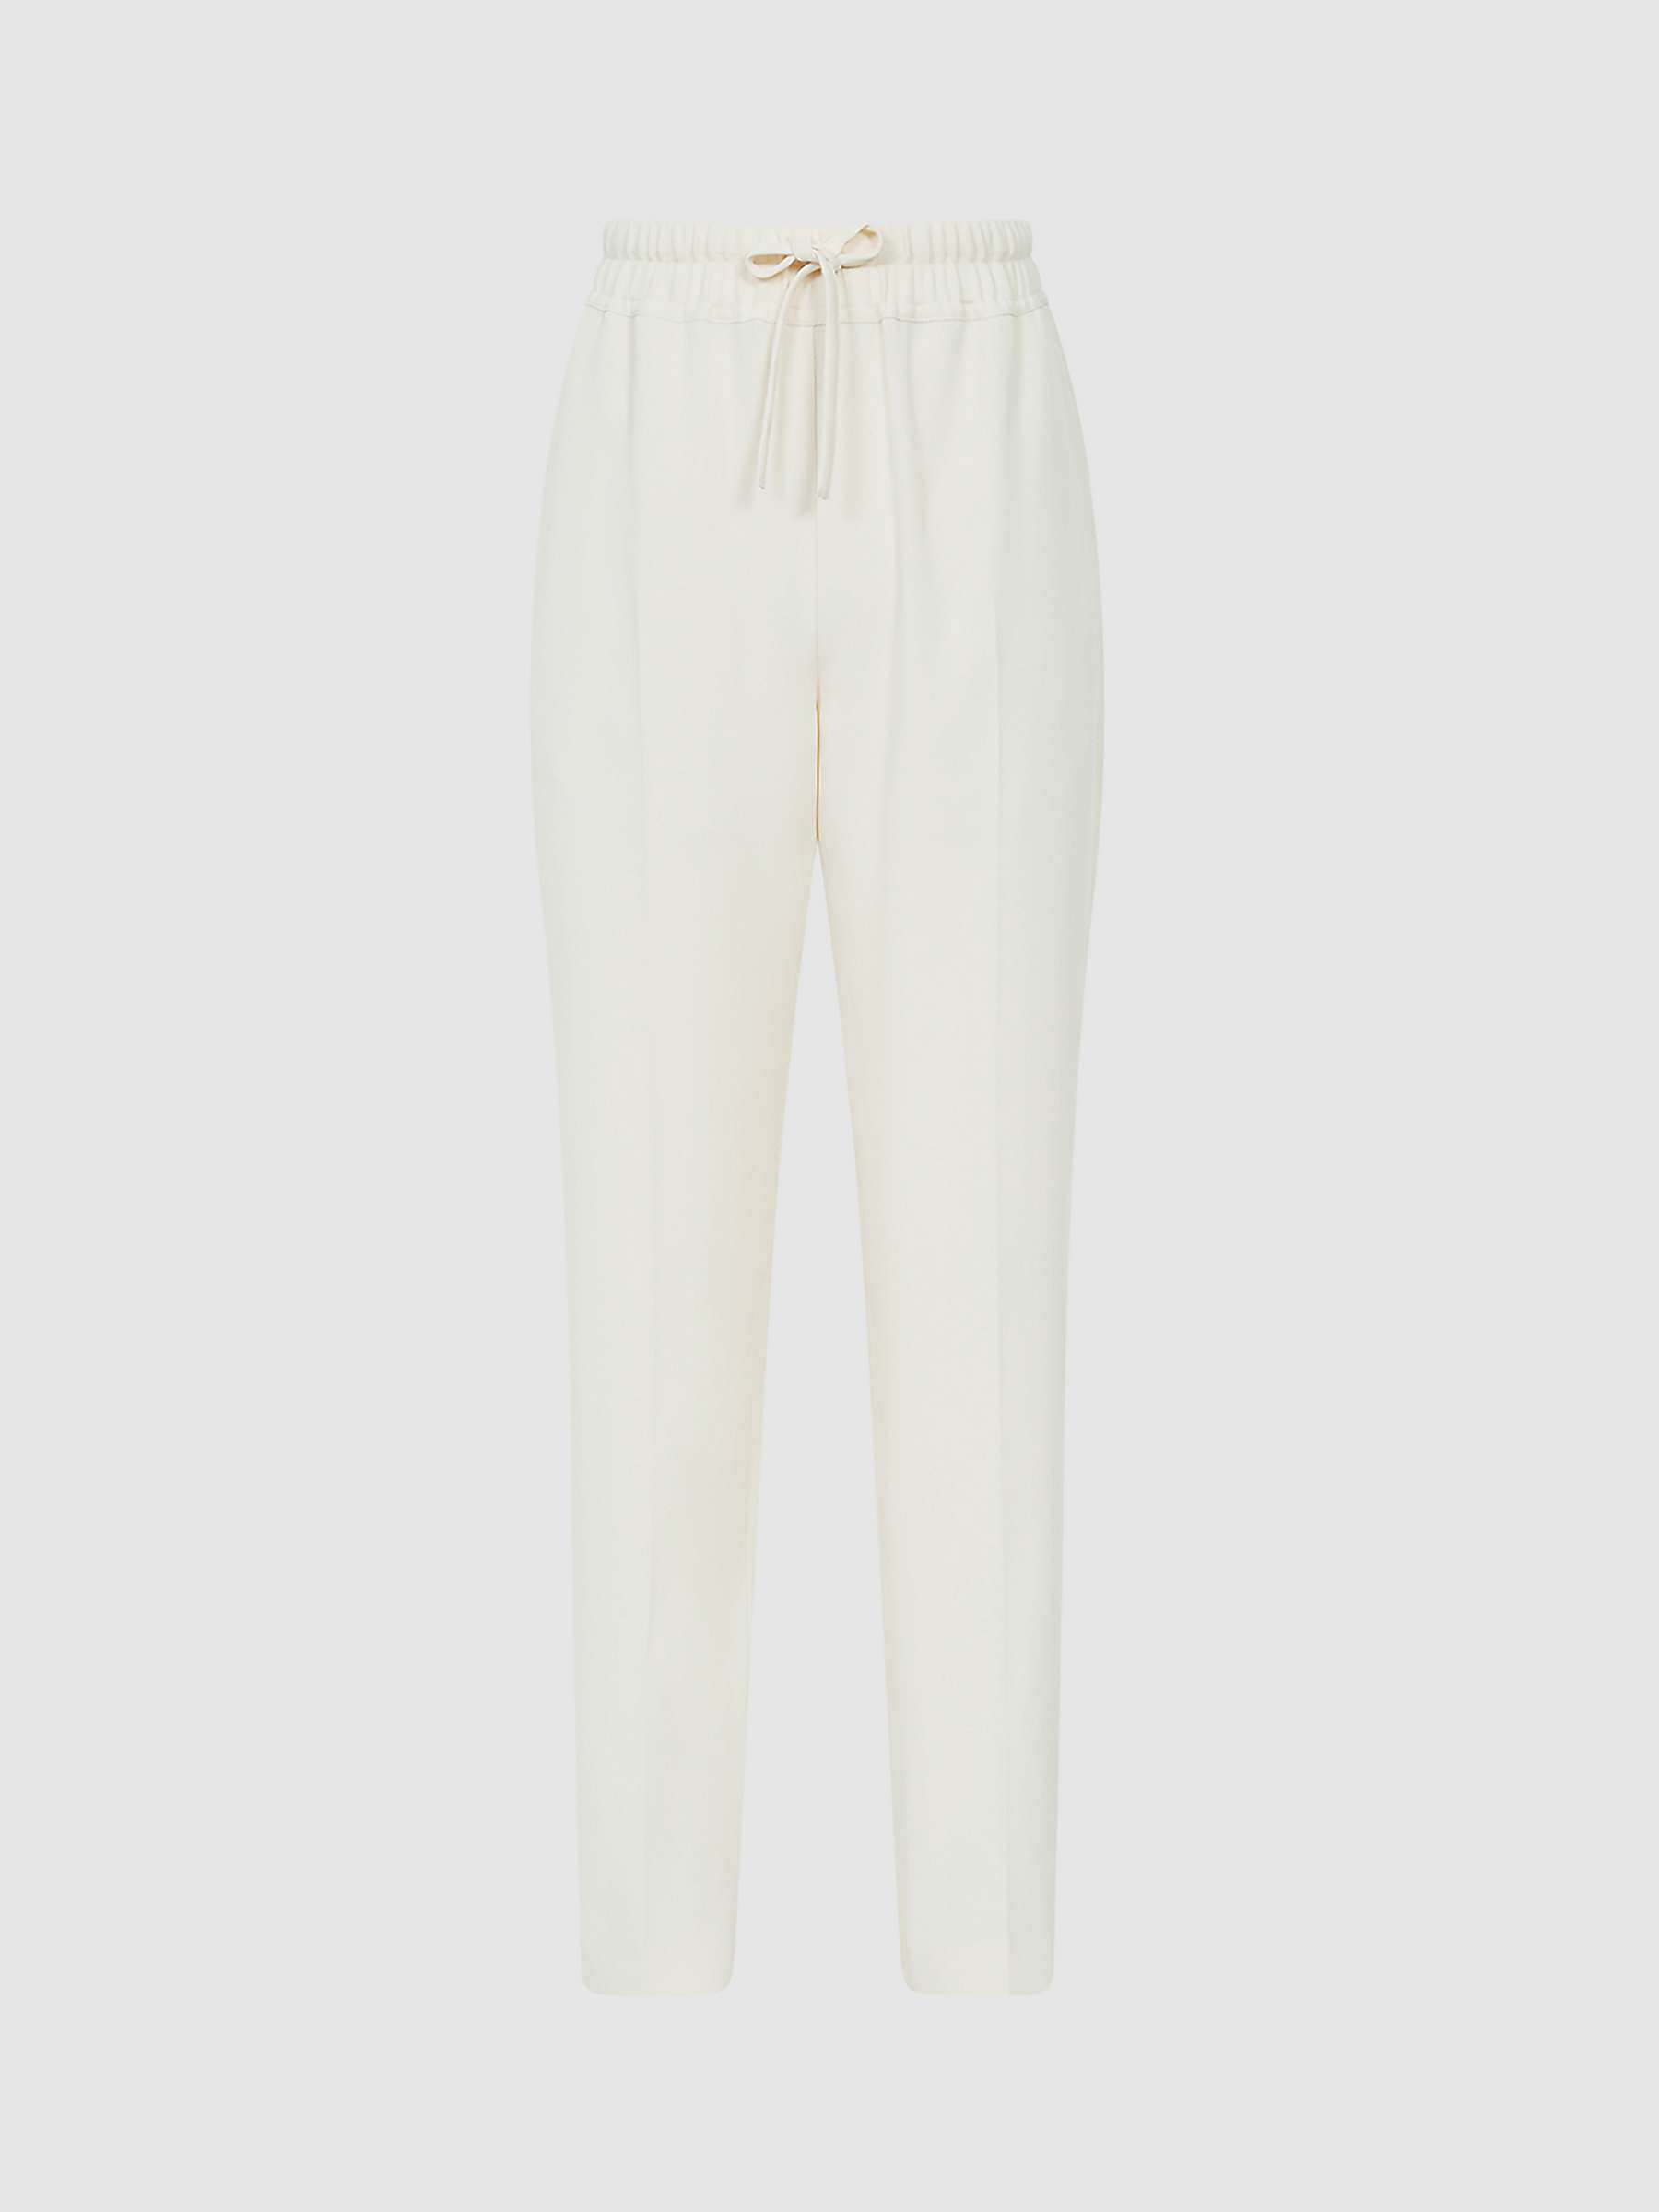 Reiss Hailey Pull On Trousers, Cream at John Lewis & Partners